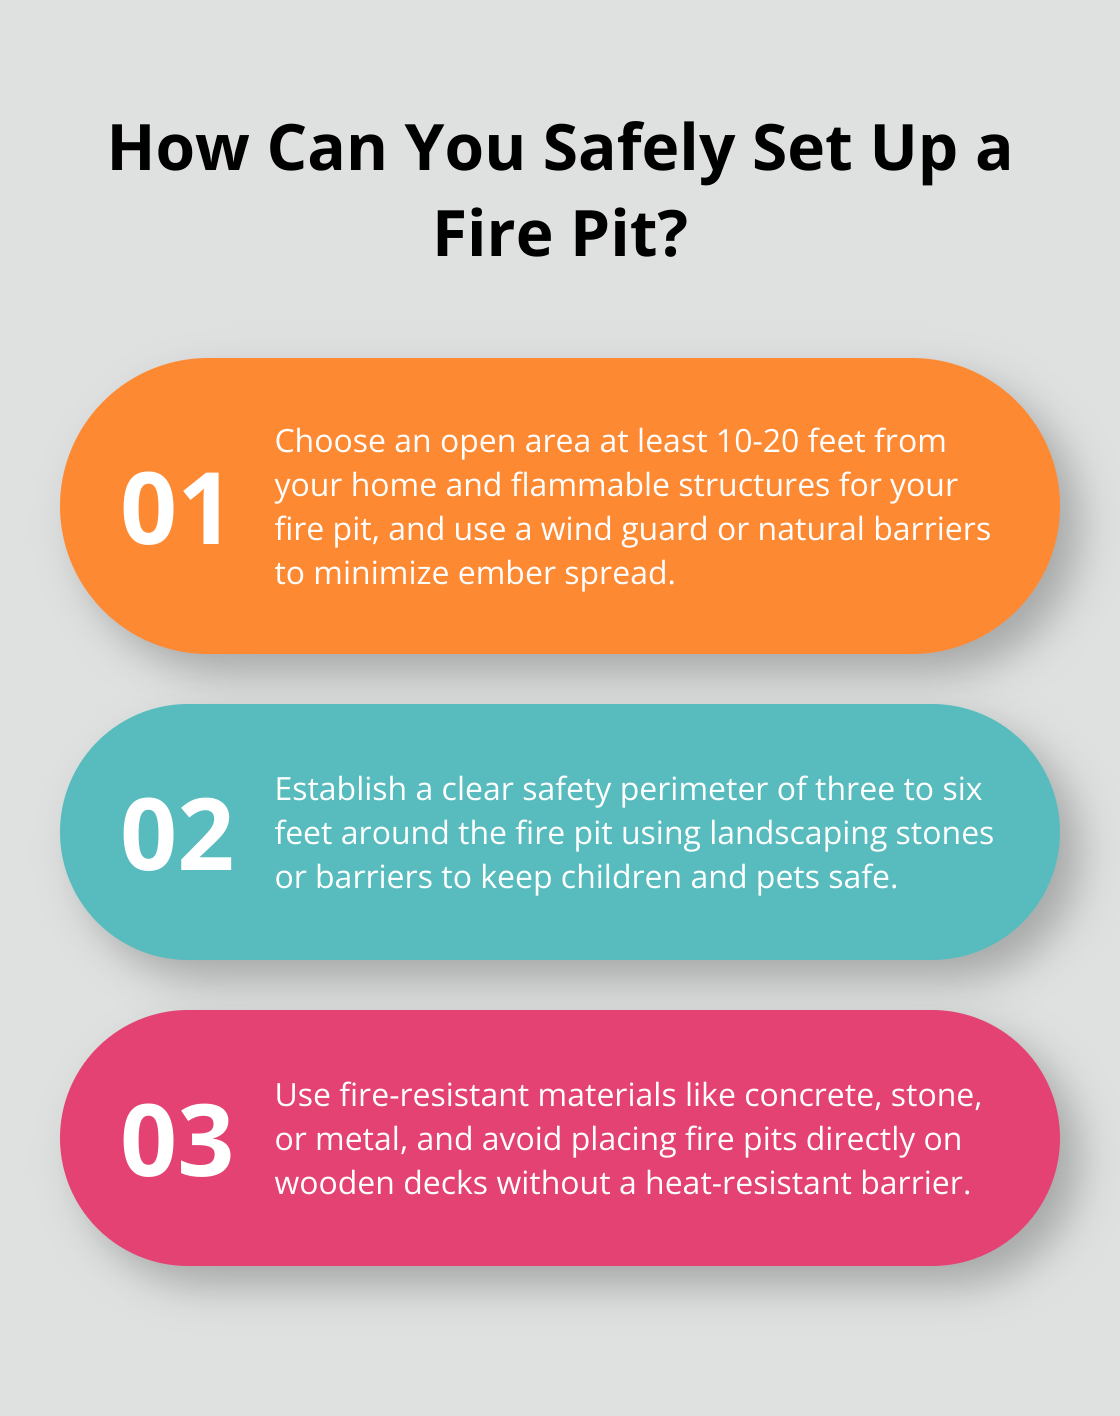 Fact - How Can You Safely Set Up a Fire Pit?